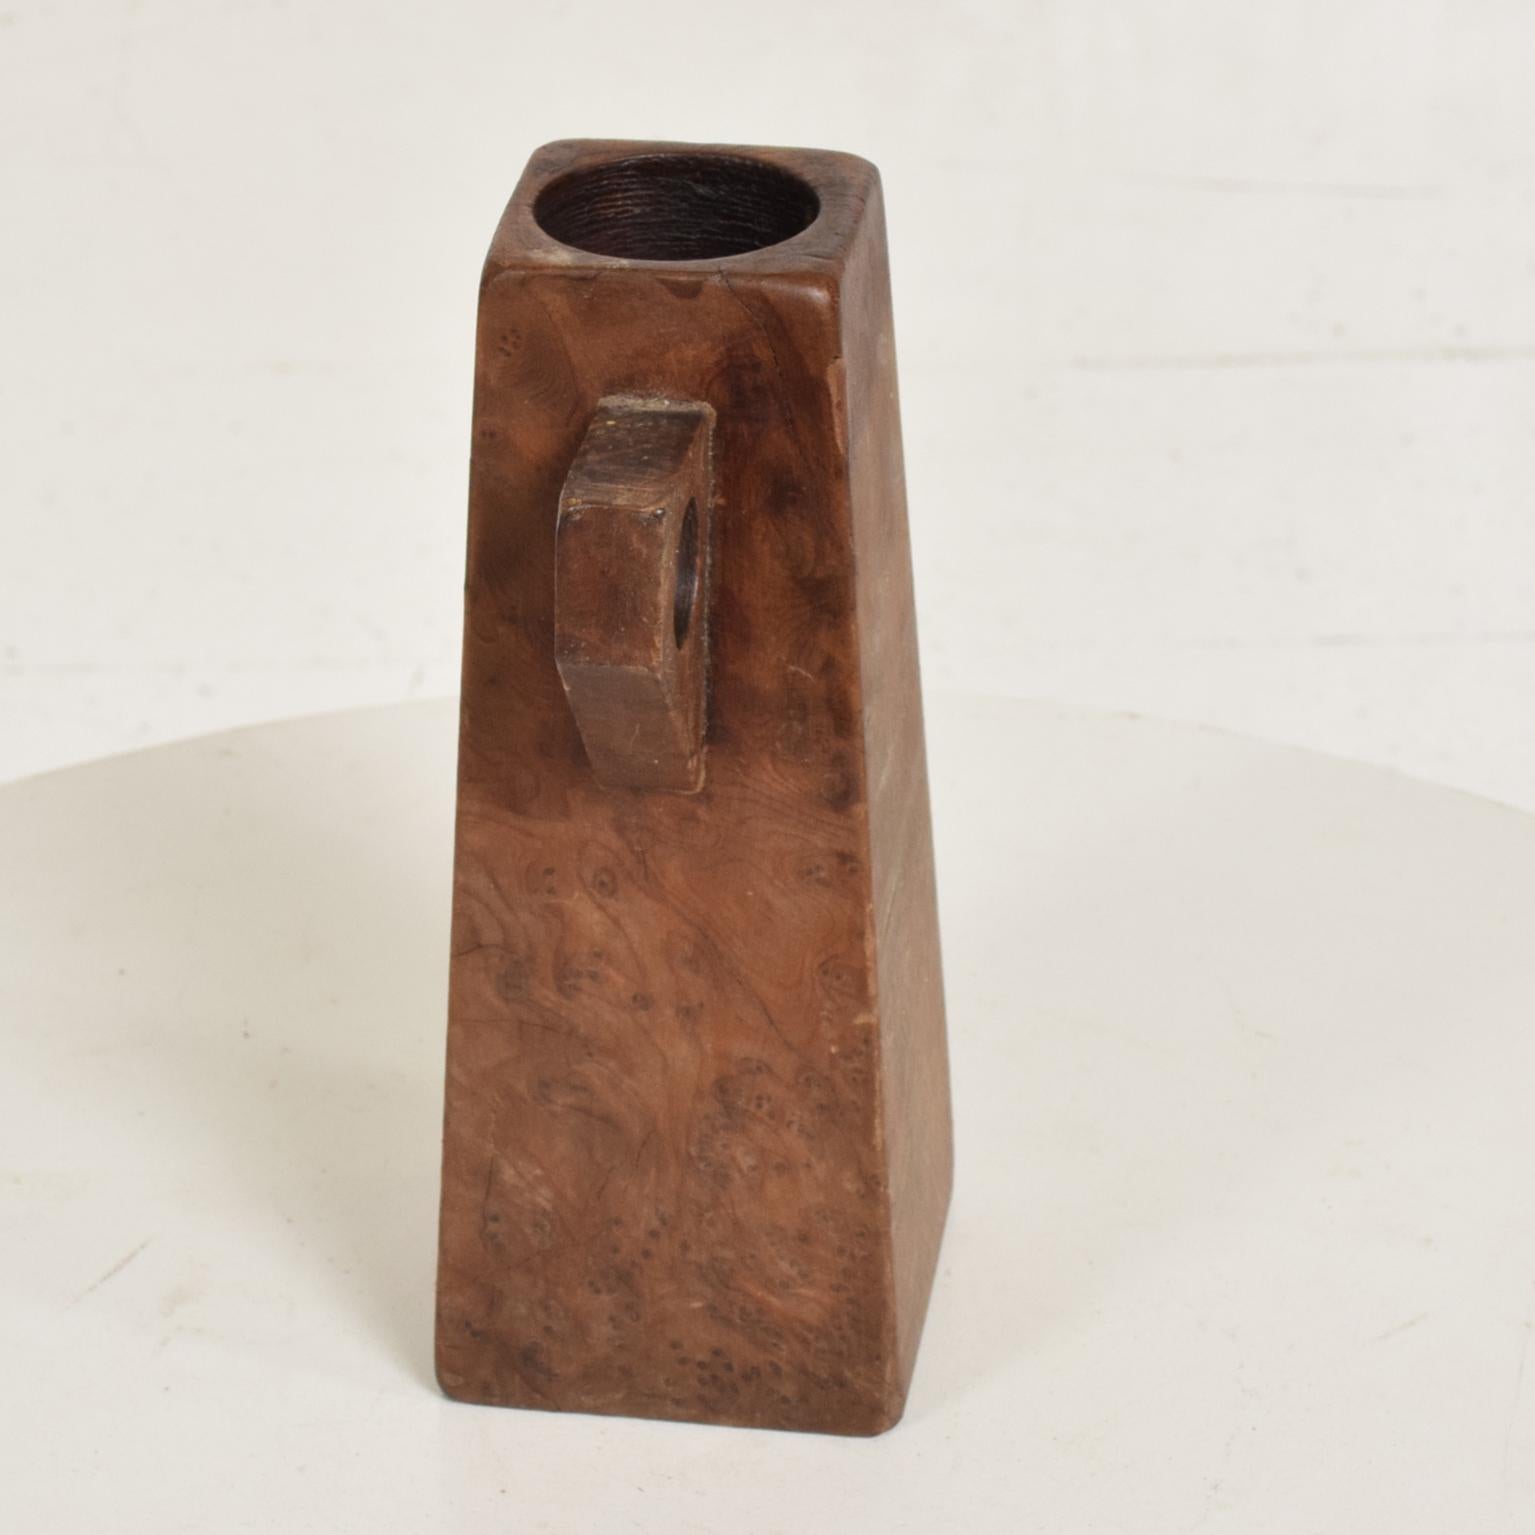 For your consideration, a Mid-Century Modern burl wood craftsmanship candleholder.

Made in the USA circa the 1960s. Unmarked. Beautiful clean modern lines. 

Dimensions: 7 1/4